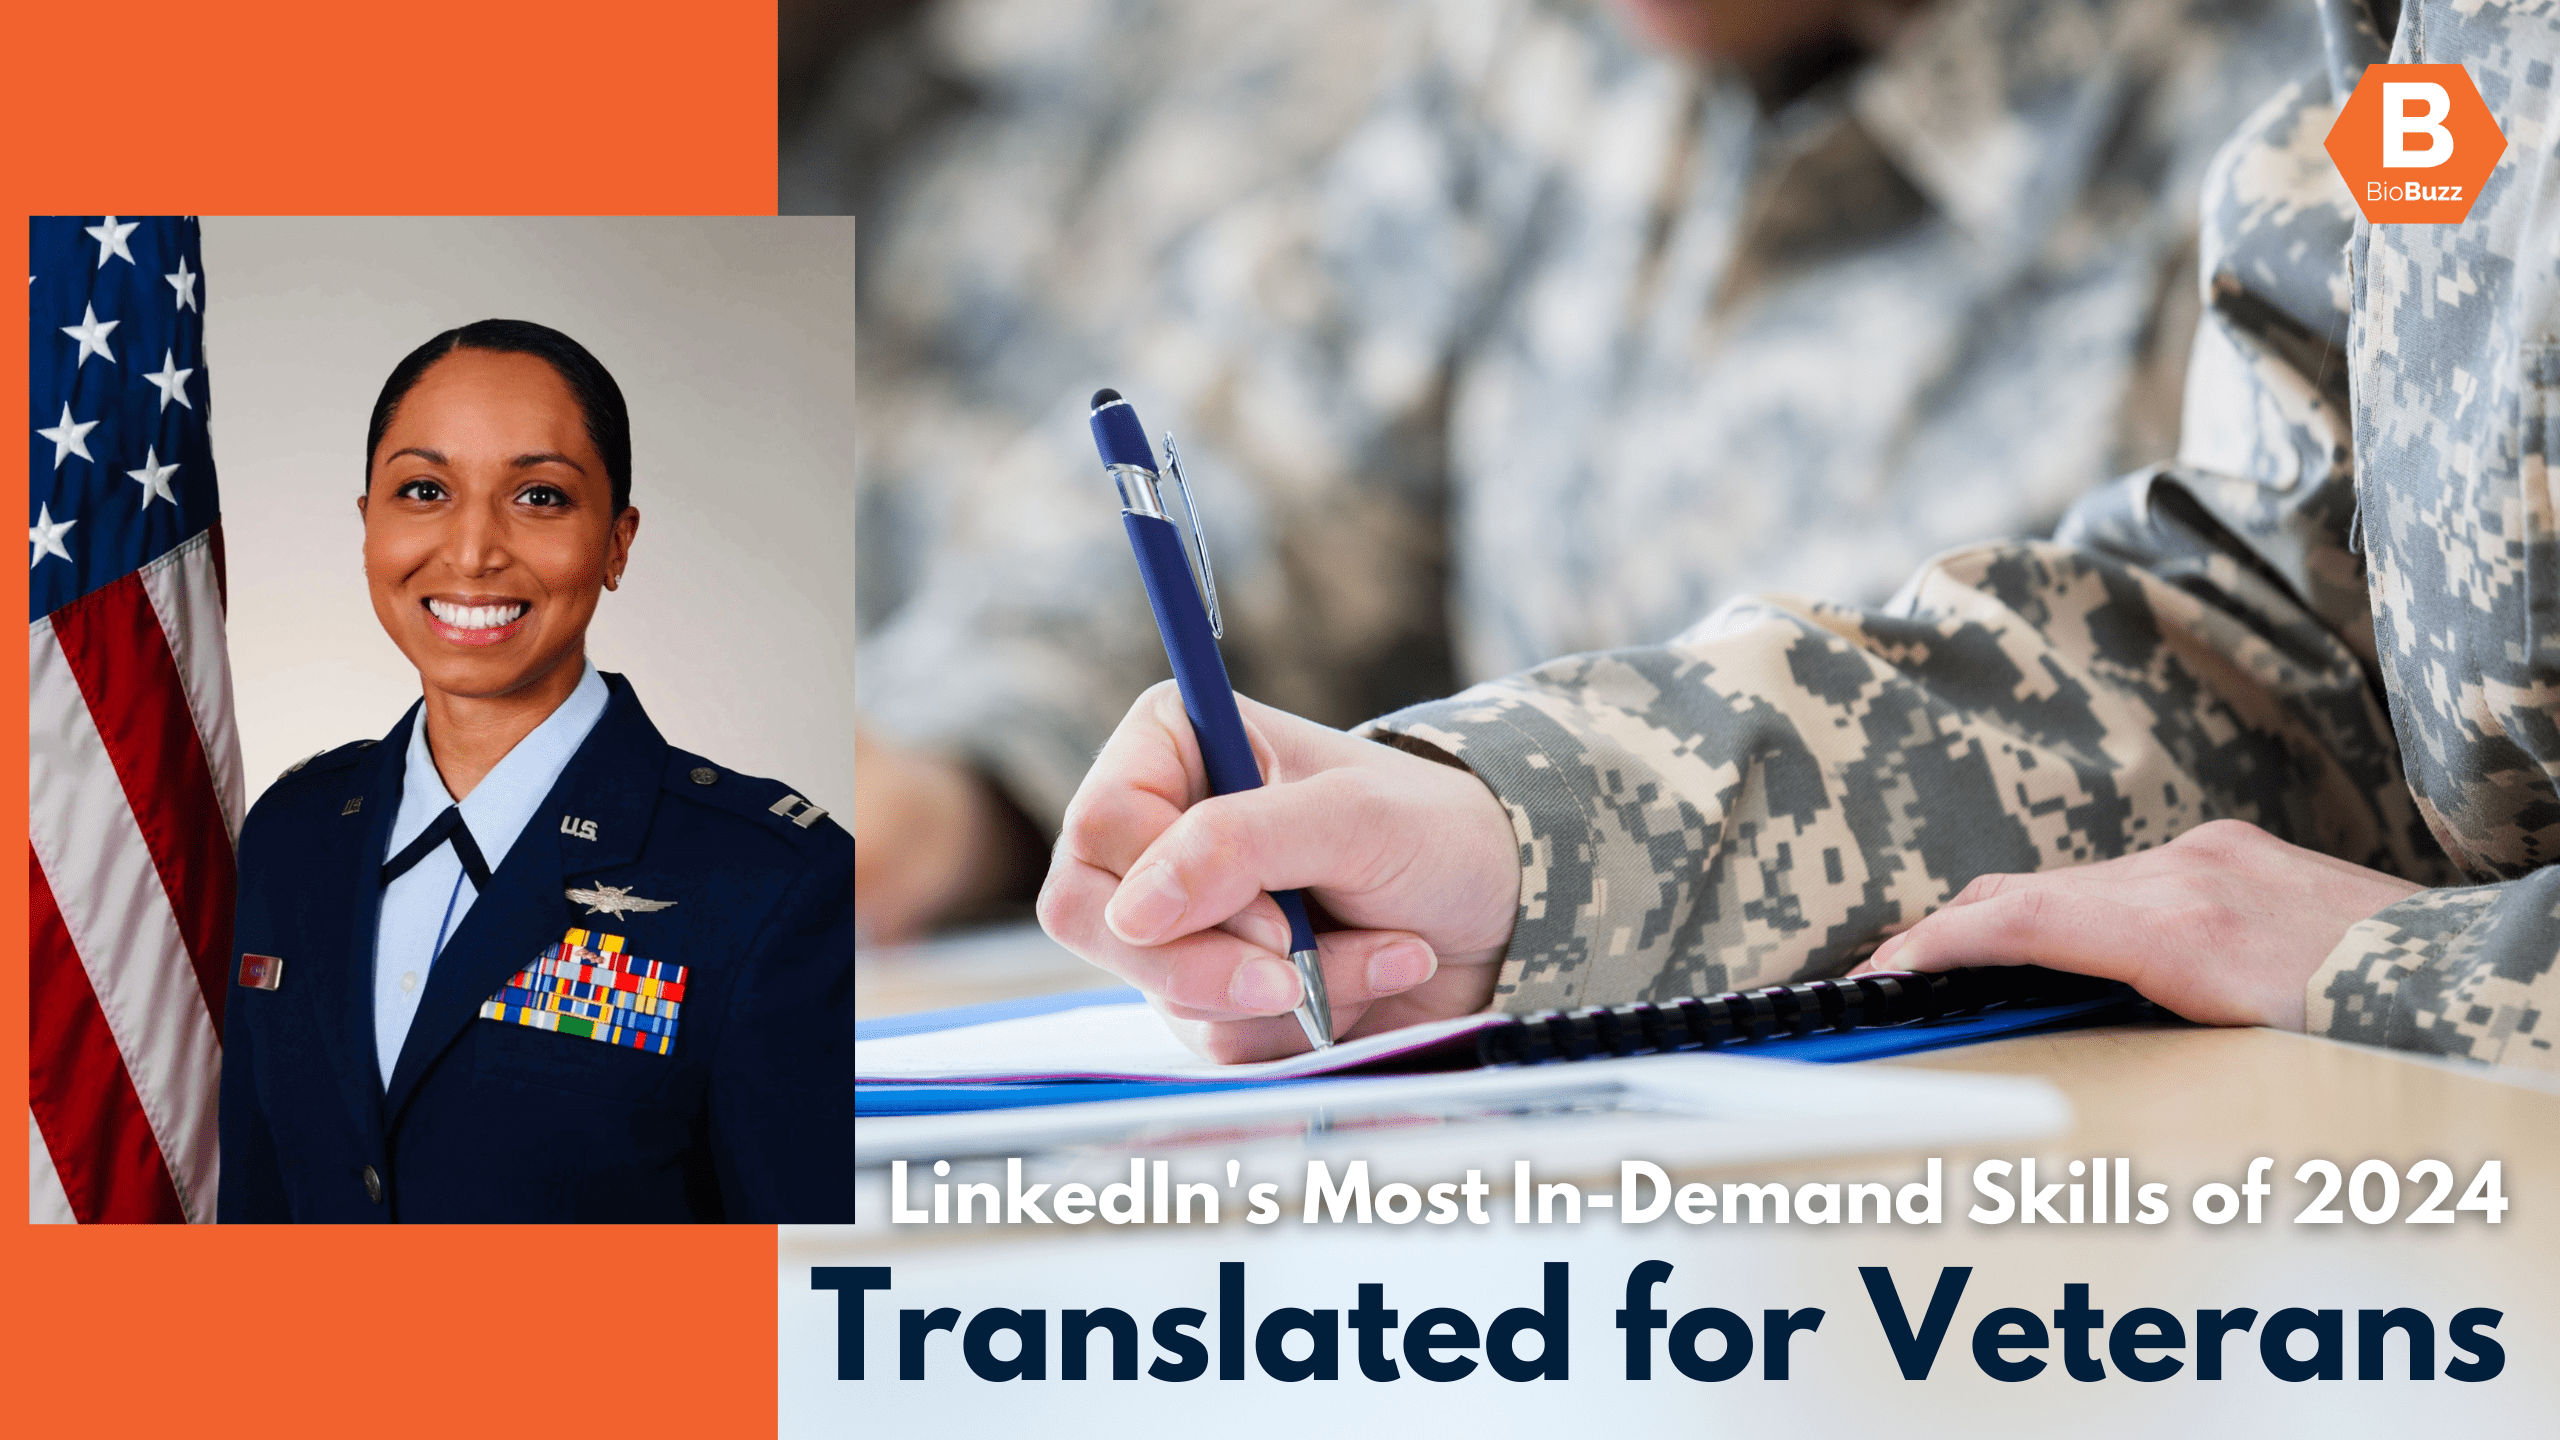 LinkedIn's Most In-Demand Skills of 2024 - Translated for Veterans